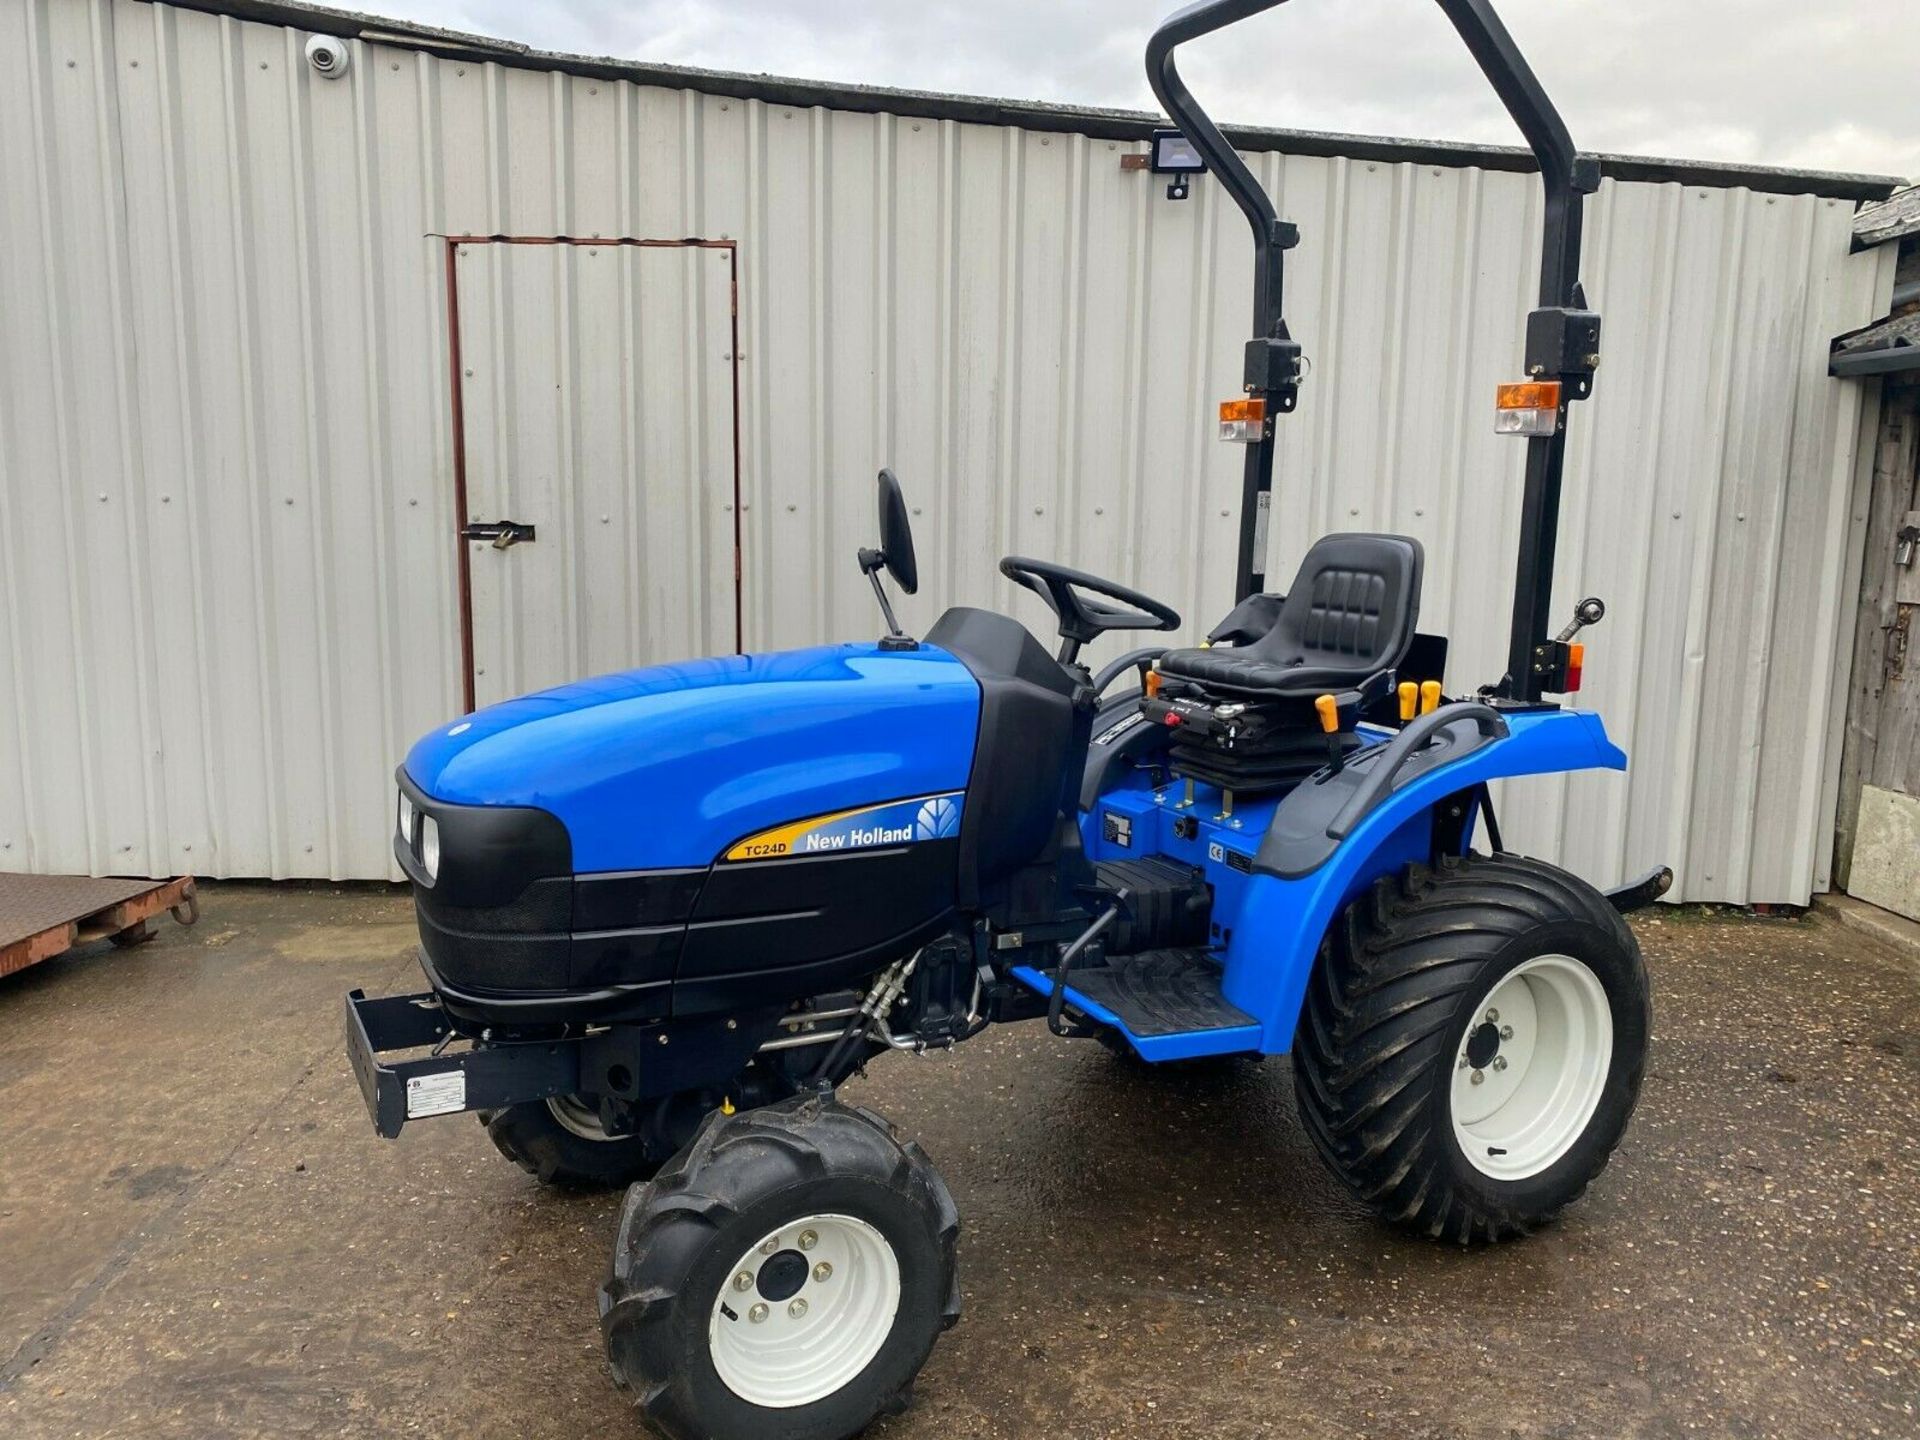 COMPACT TRACTOR NEW HOLLAND TC24D, 4 X 4, ONLY 368 HOURS GENUINE FROM NEW, HYDROSTATIC DRIVE